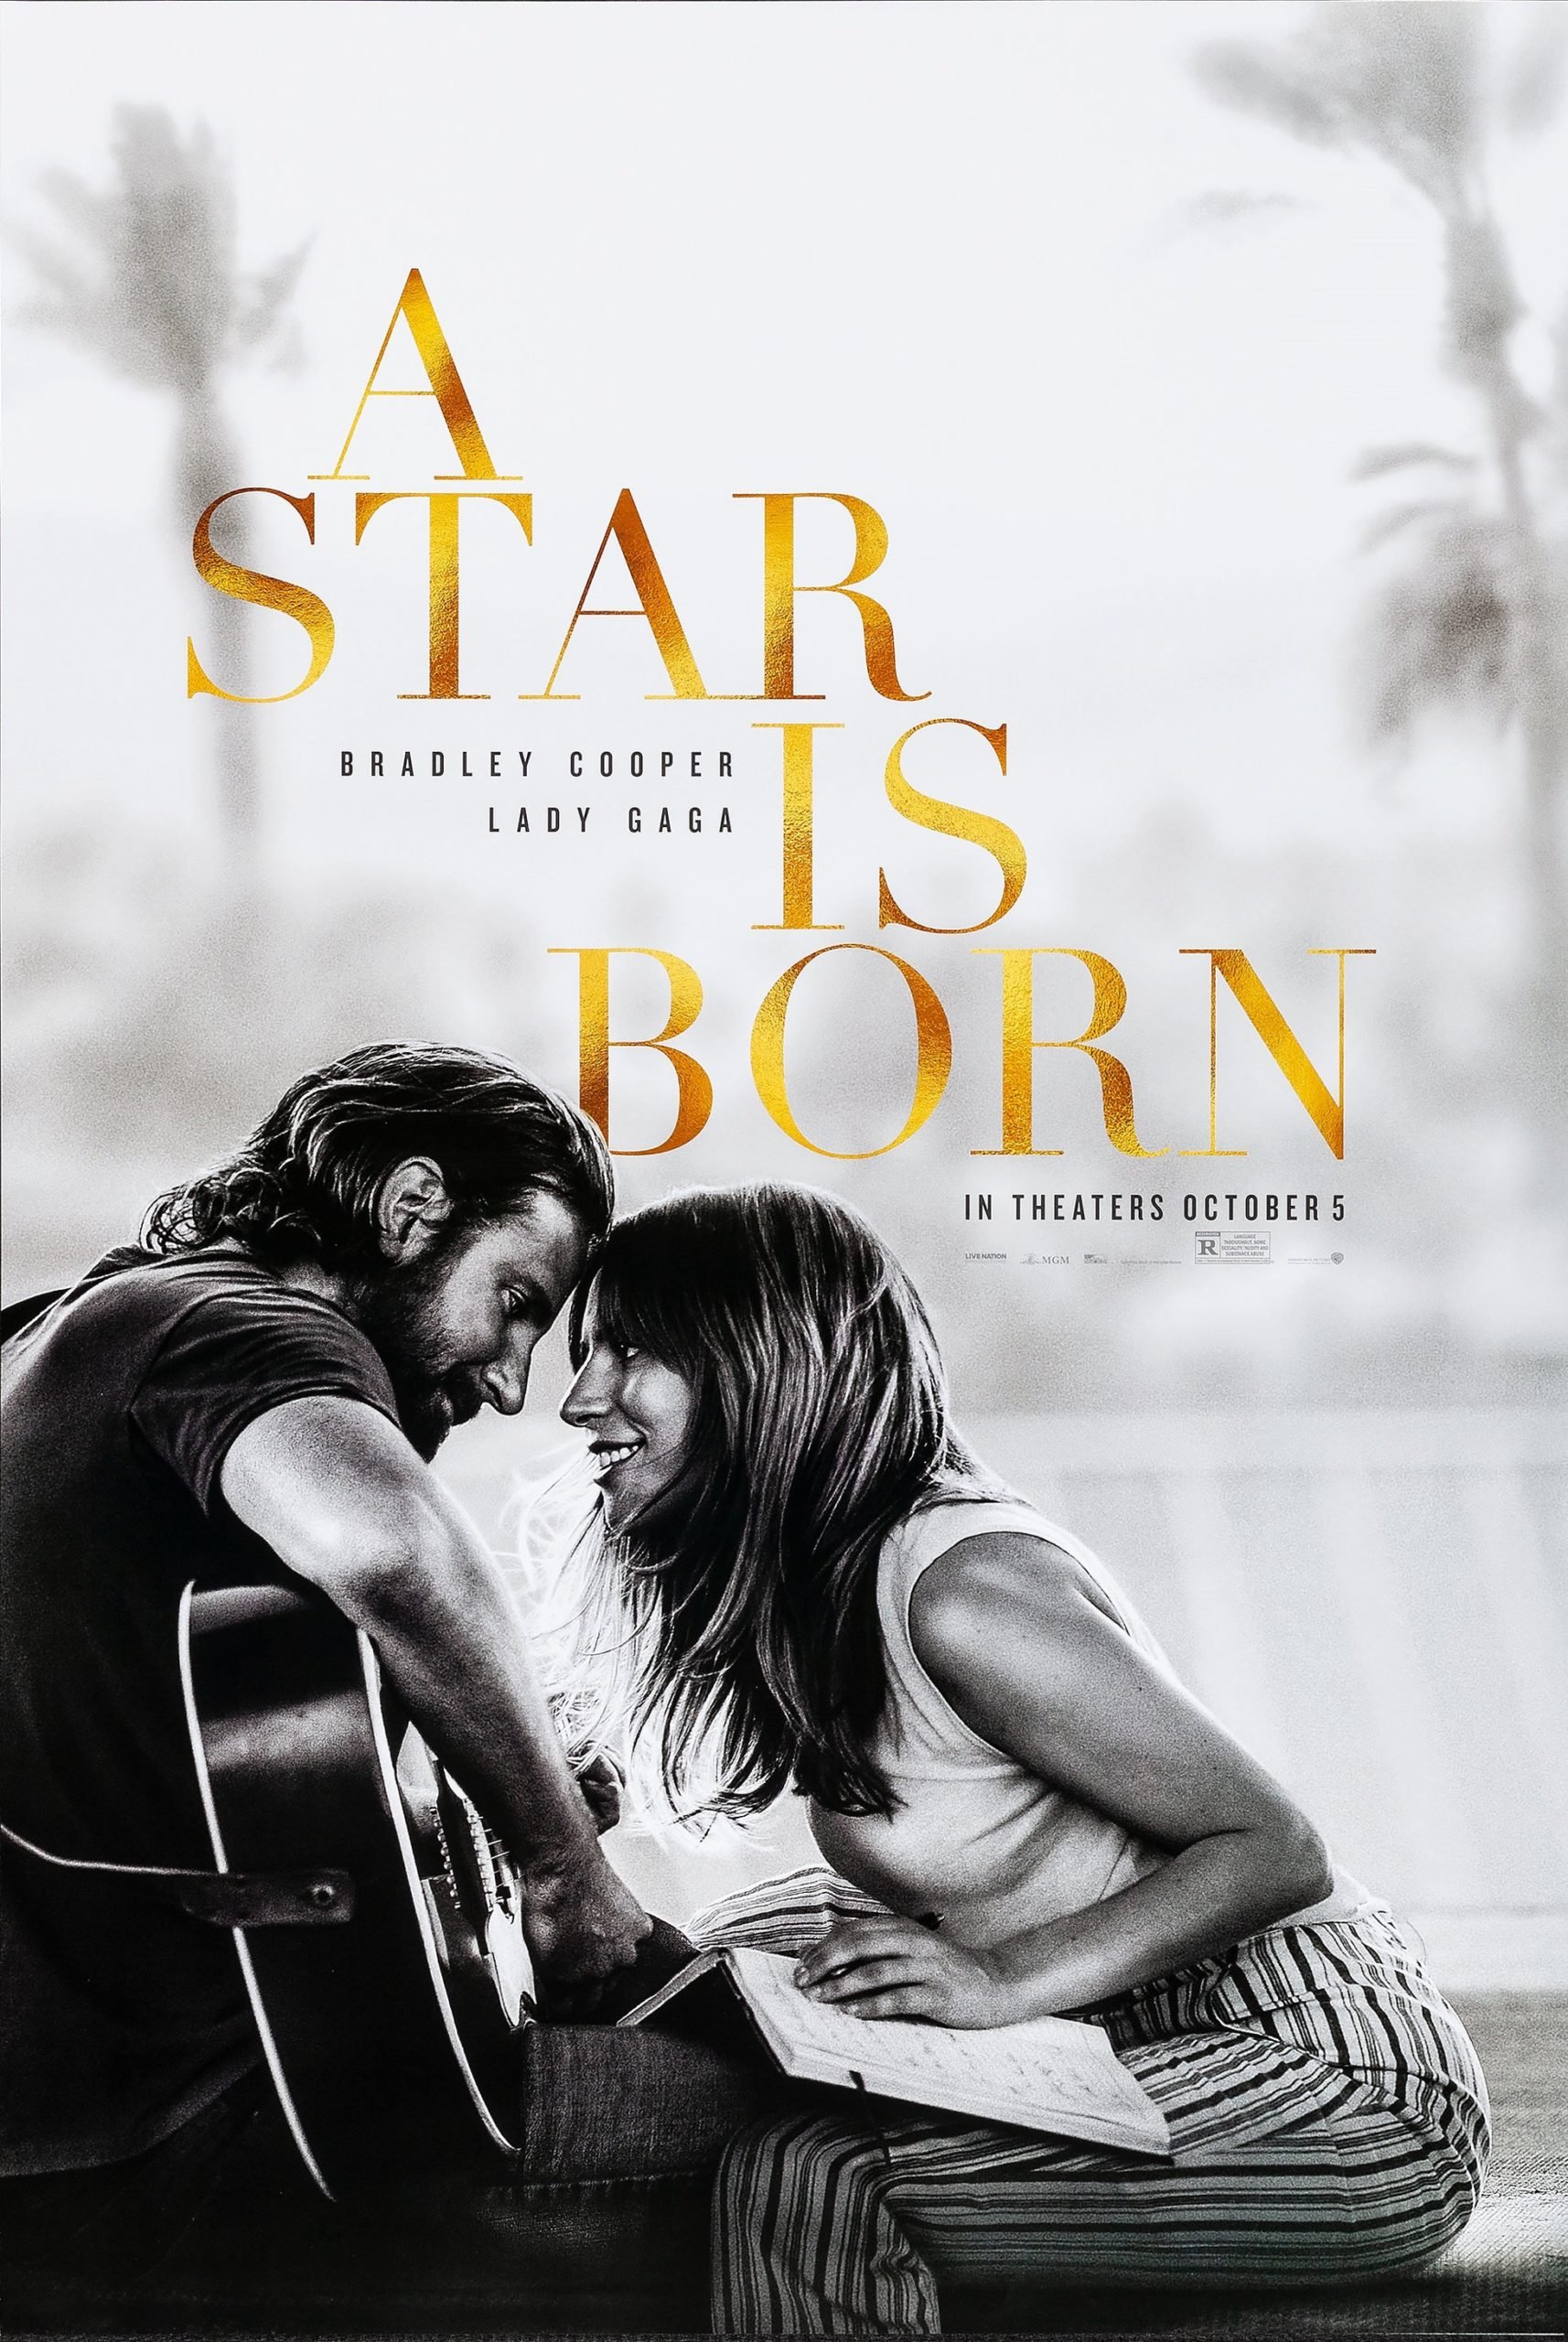 Original vintage US cinema poster for A Star is Born starring Bradley Cooper and Lady Gaga